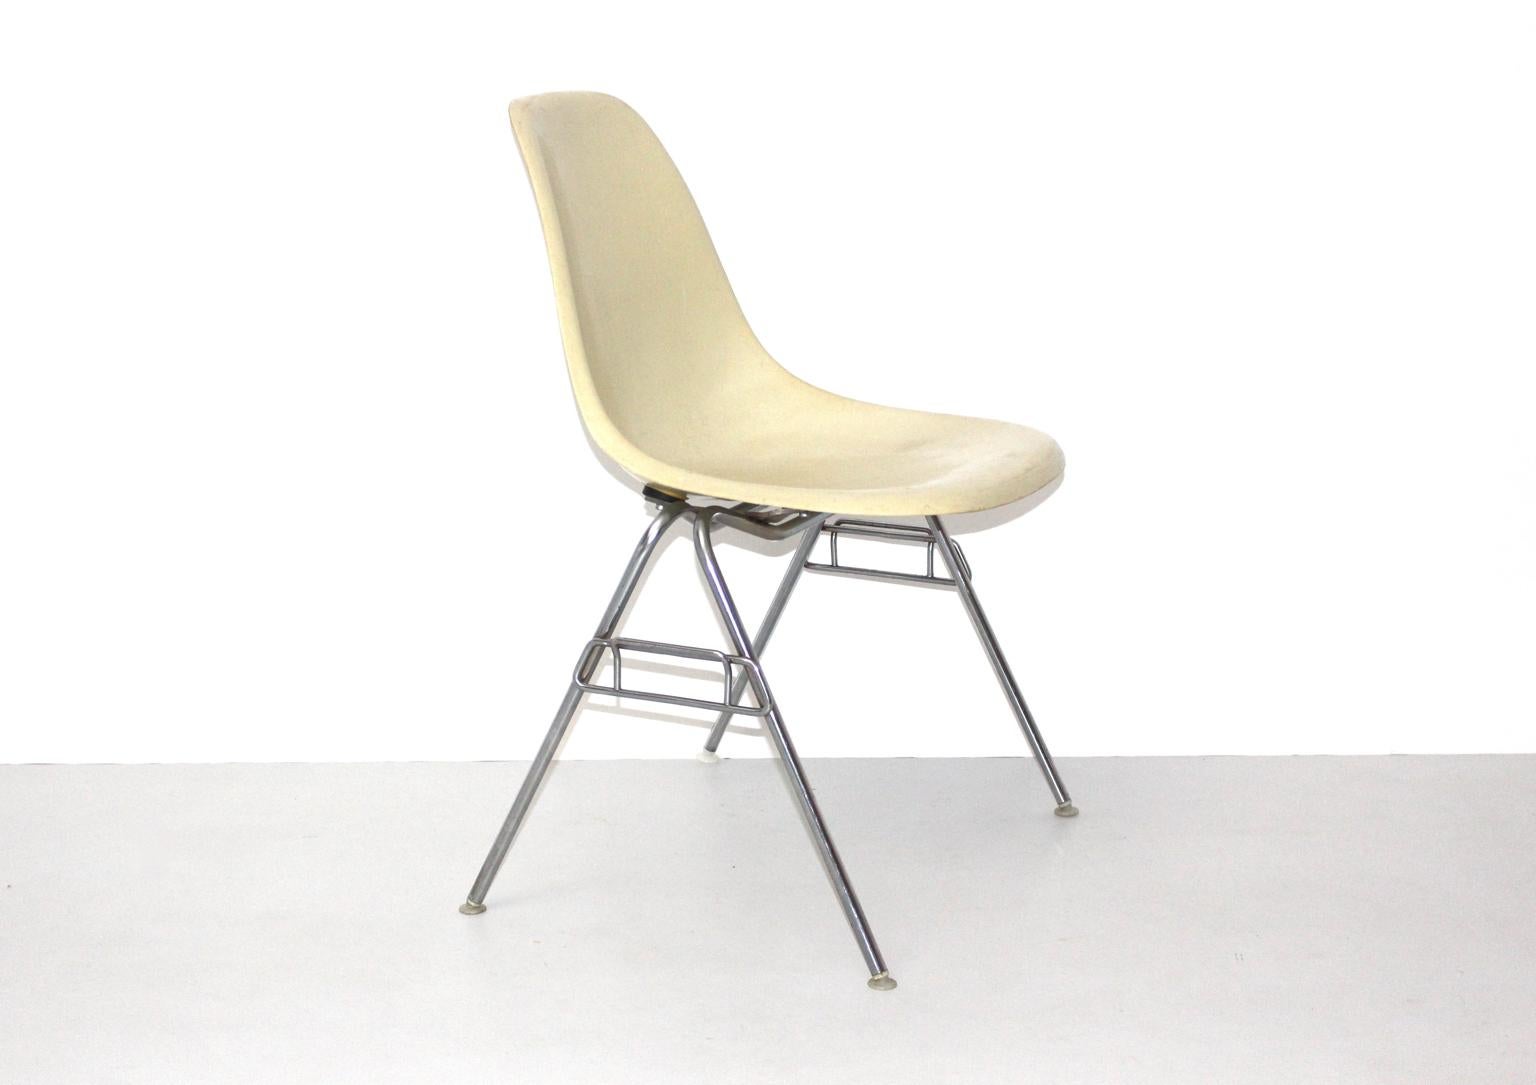 Mid Century Modern vintage model DSS-N fiberglass chair was designed by Charles & Ray Eames and produced by Hermann Miller, Zeeland, Michigan USA. Labeled underneath.
Chromed tube steel frame with an ivory colored fiberglass seat shell.
The vintage